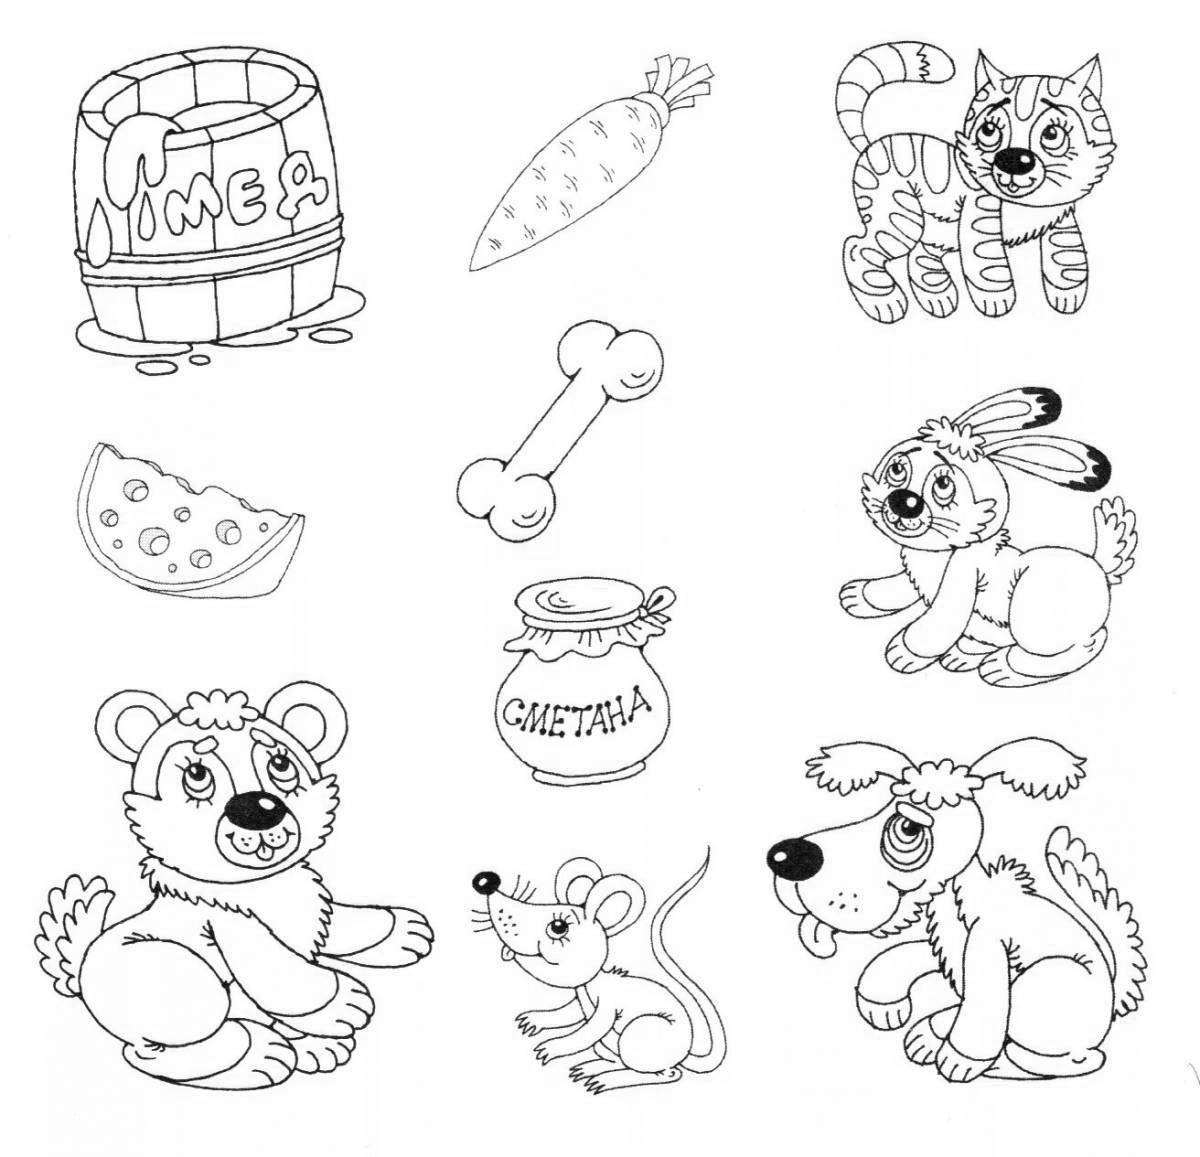 Fancy coloring book for 4-5 year olds